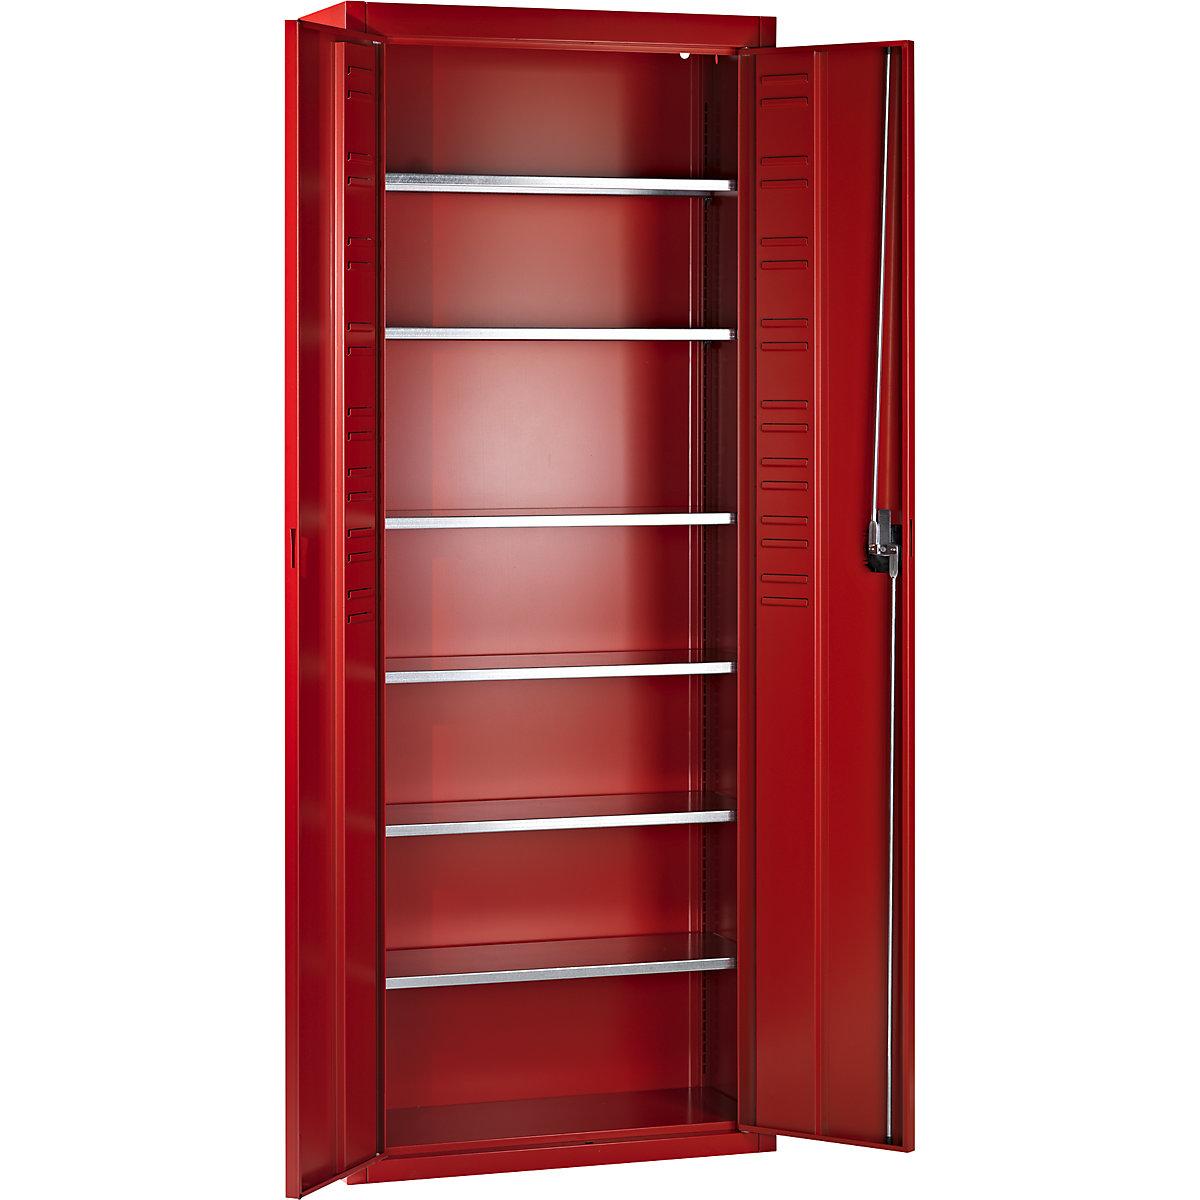 Storage cupboard, without open fronted storage bins – mauser, HxWxD 1740 x 680 x 280 mm, single colour, flame red, 3+ items-7